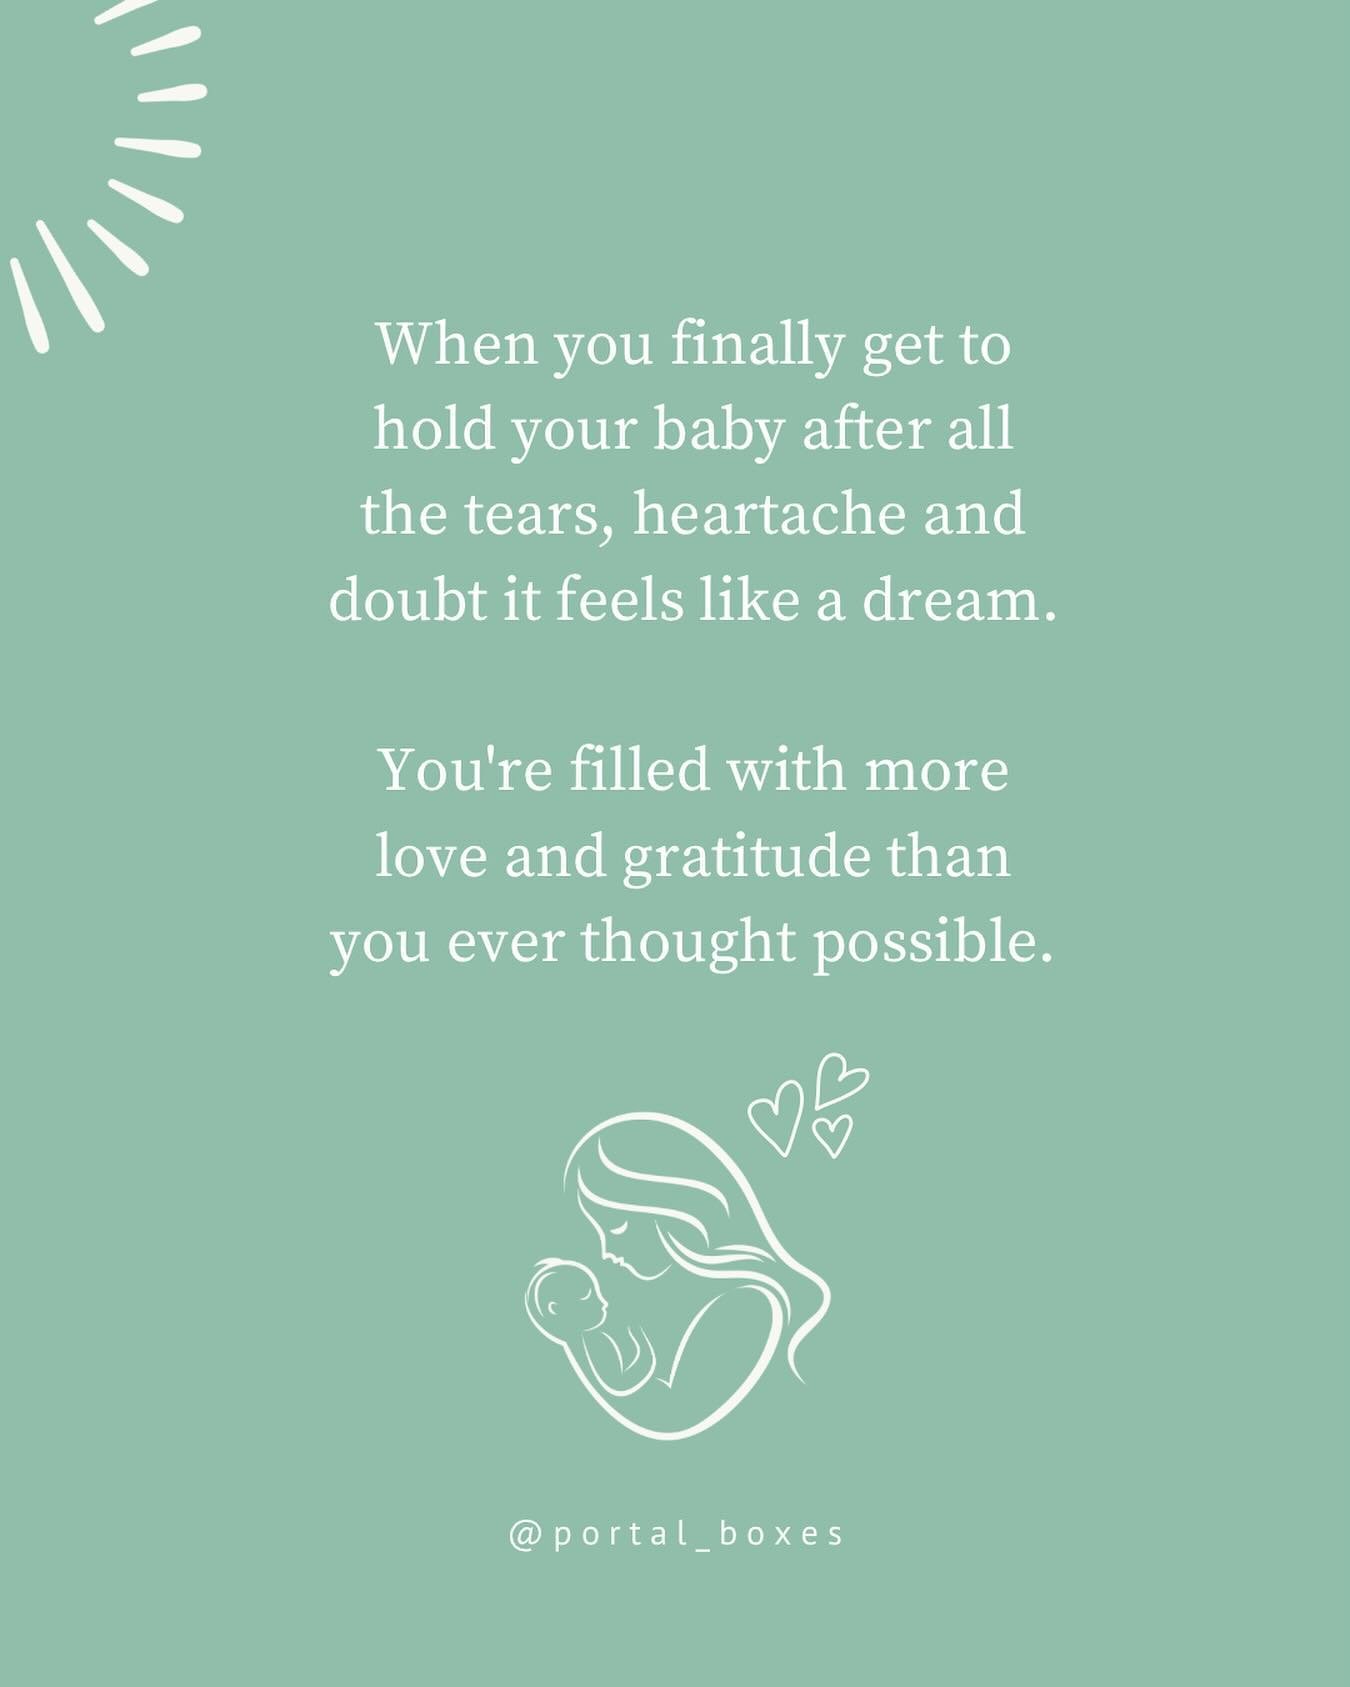 Infertility doesn&rsquo;t end with pregnancy.

It doesn&rsquo;t end when you&rsquo;re baby arrives.

It stays with you.

And in some ways that can be a good thing.

You feel so grateful, even on the difficult days.  Because they&rsquo;re finally here